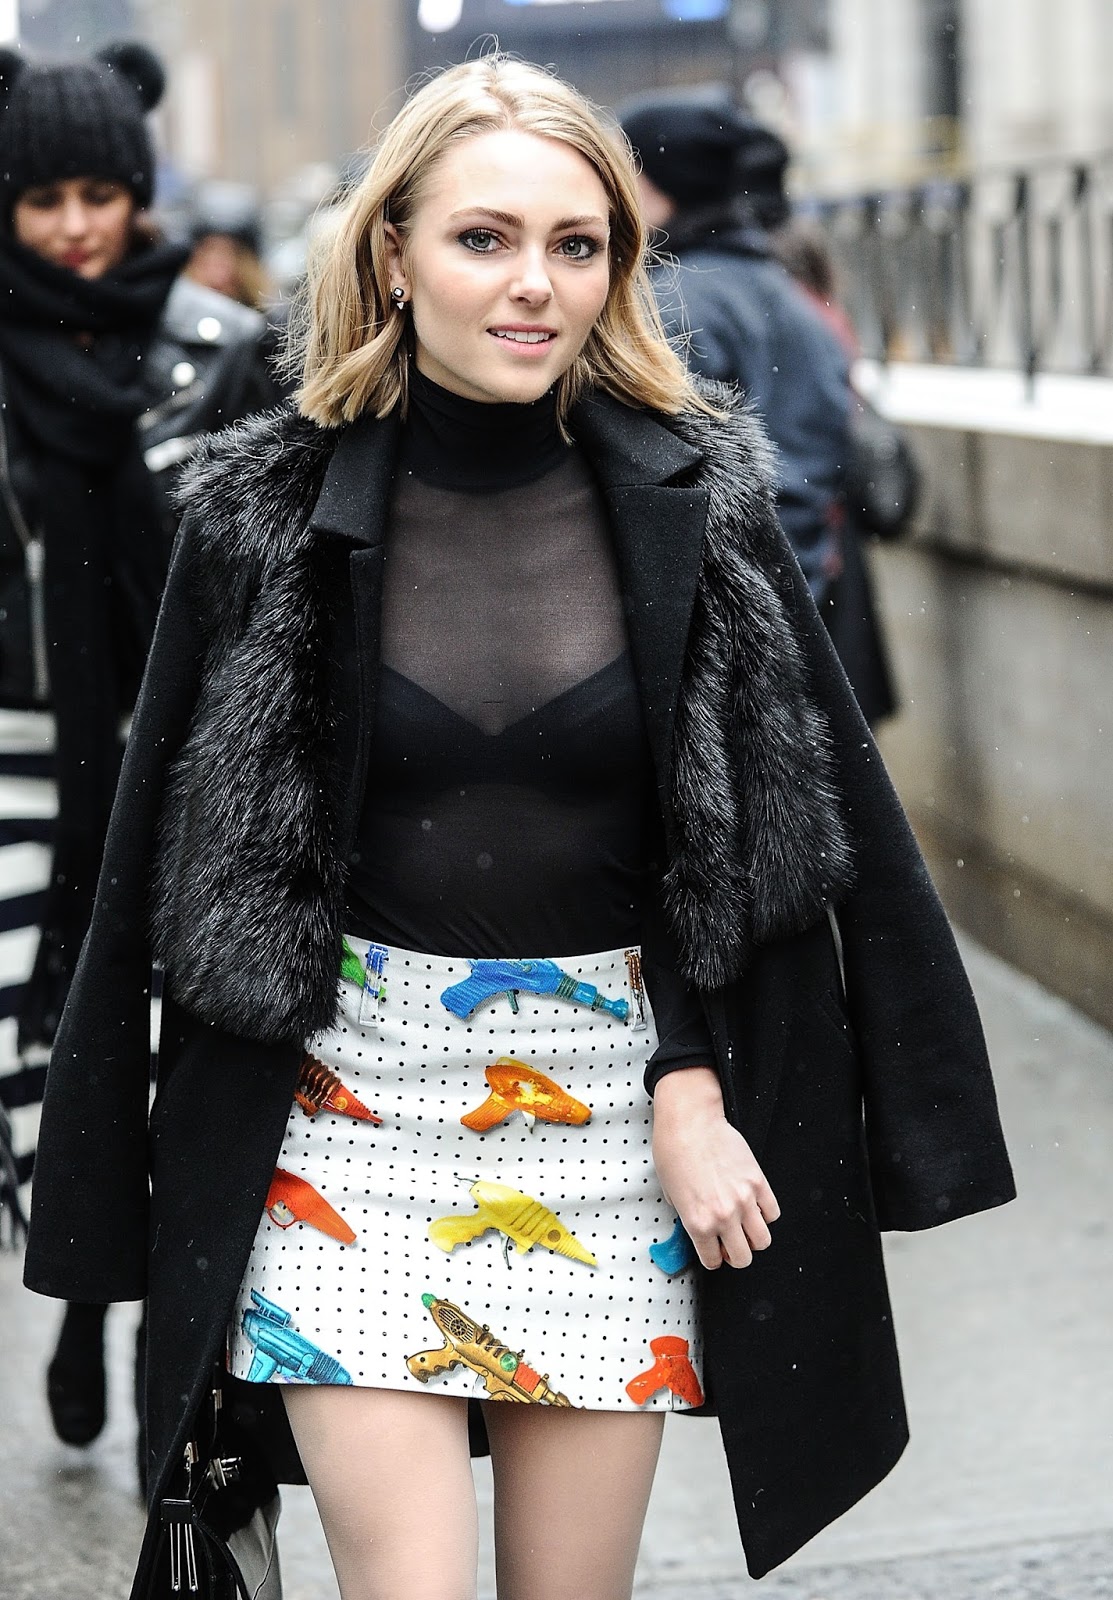 1113px x 1600px - AnnaSophia Robb out in New York City after the fashion show, February 15,  2016. - Fashionmylegs : The tights and hosiery blog